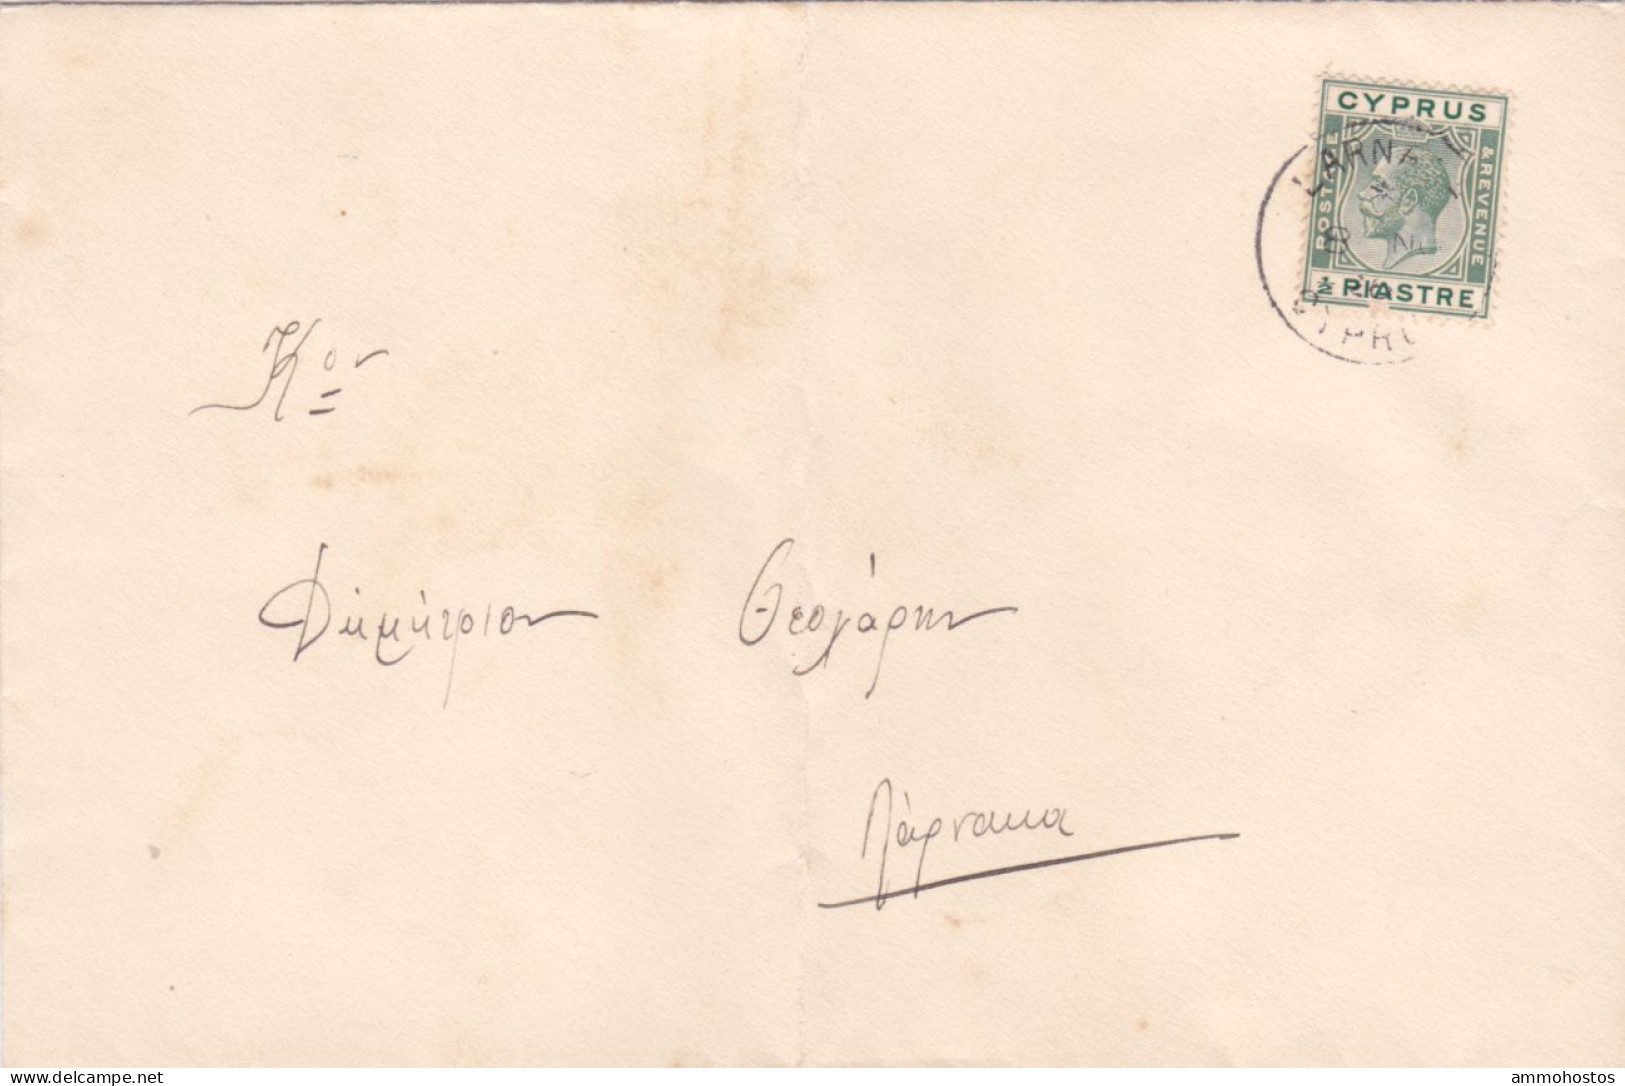 CYPRUS KGV LOCAL COVER LARNACA 1/2 PIASTRE RATE - Chipre (...-1960)